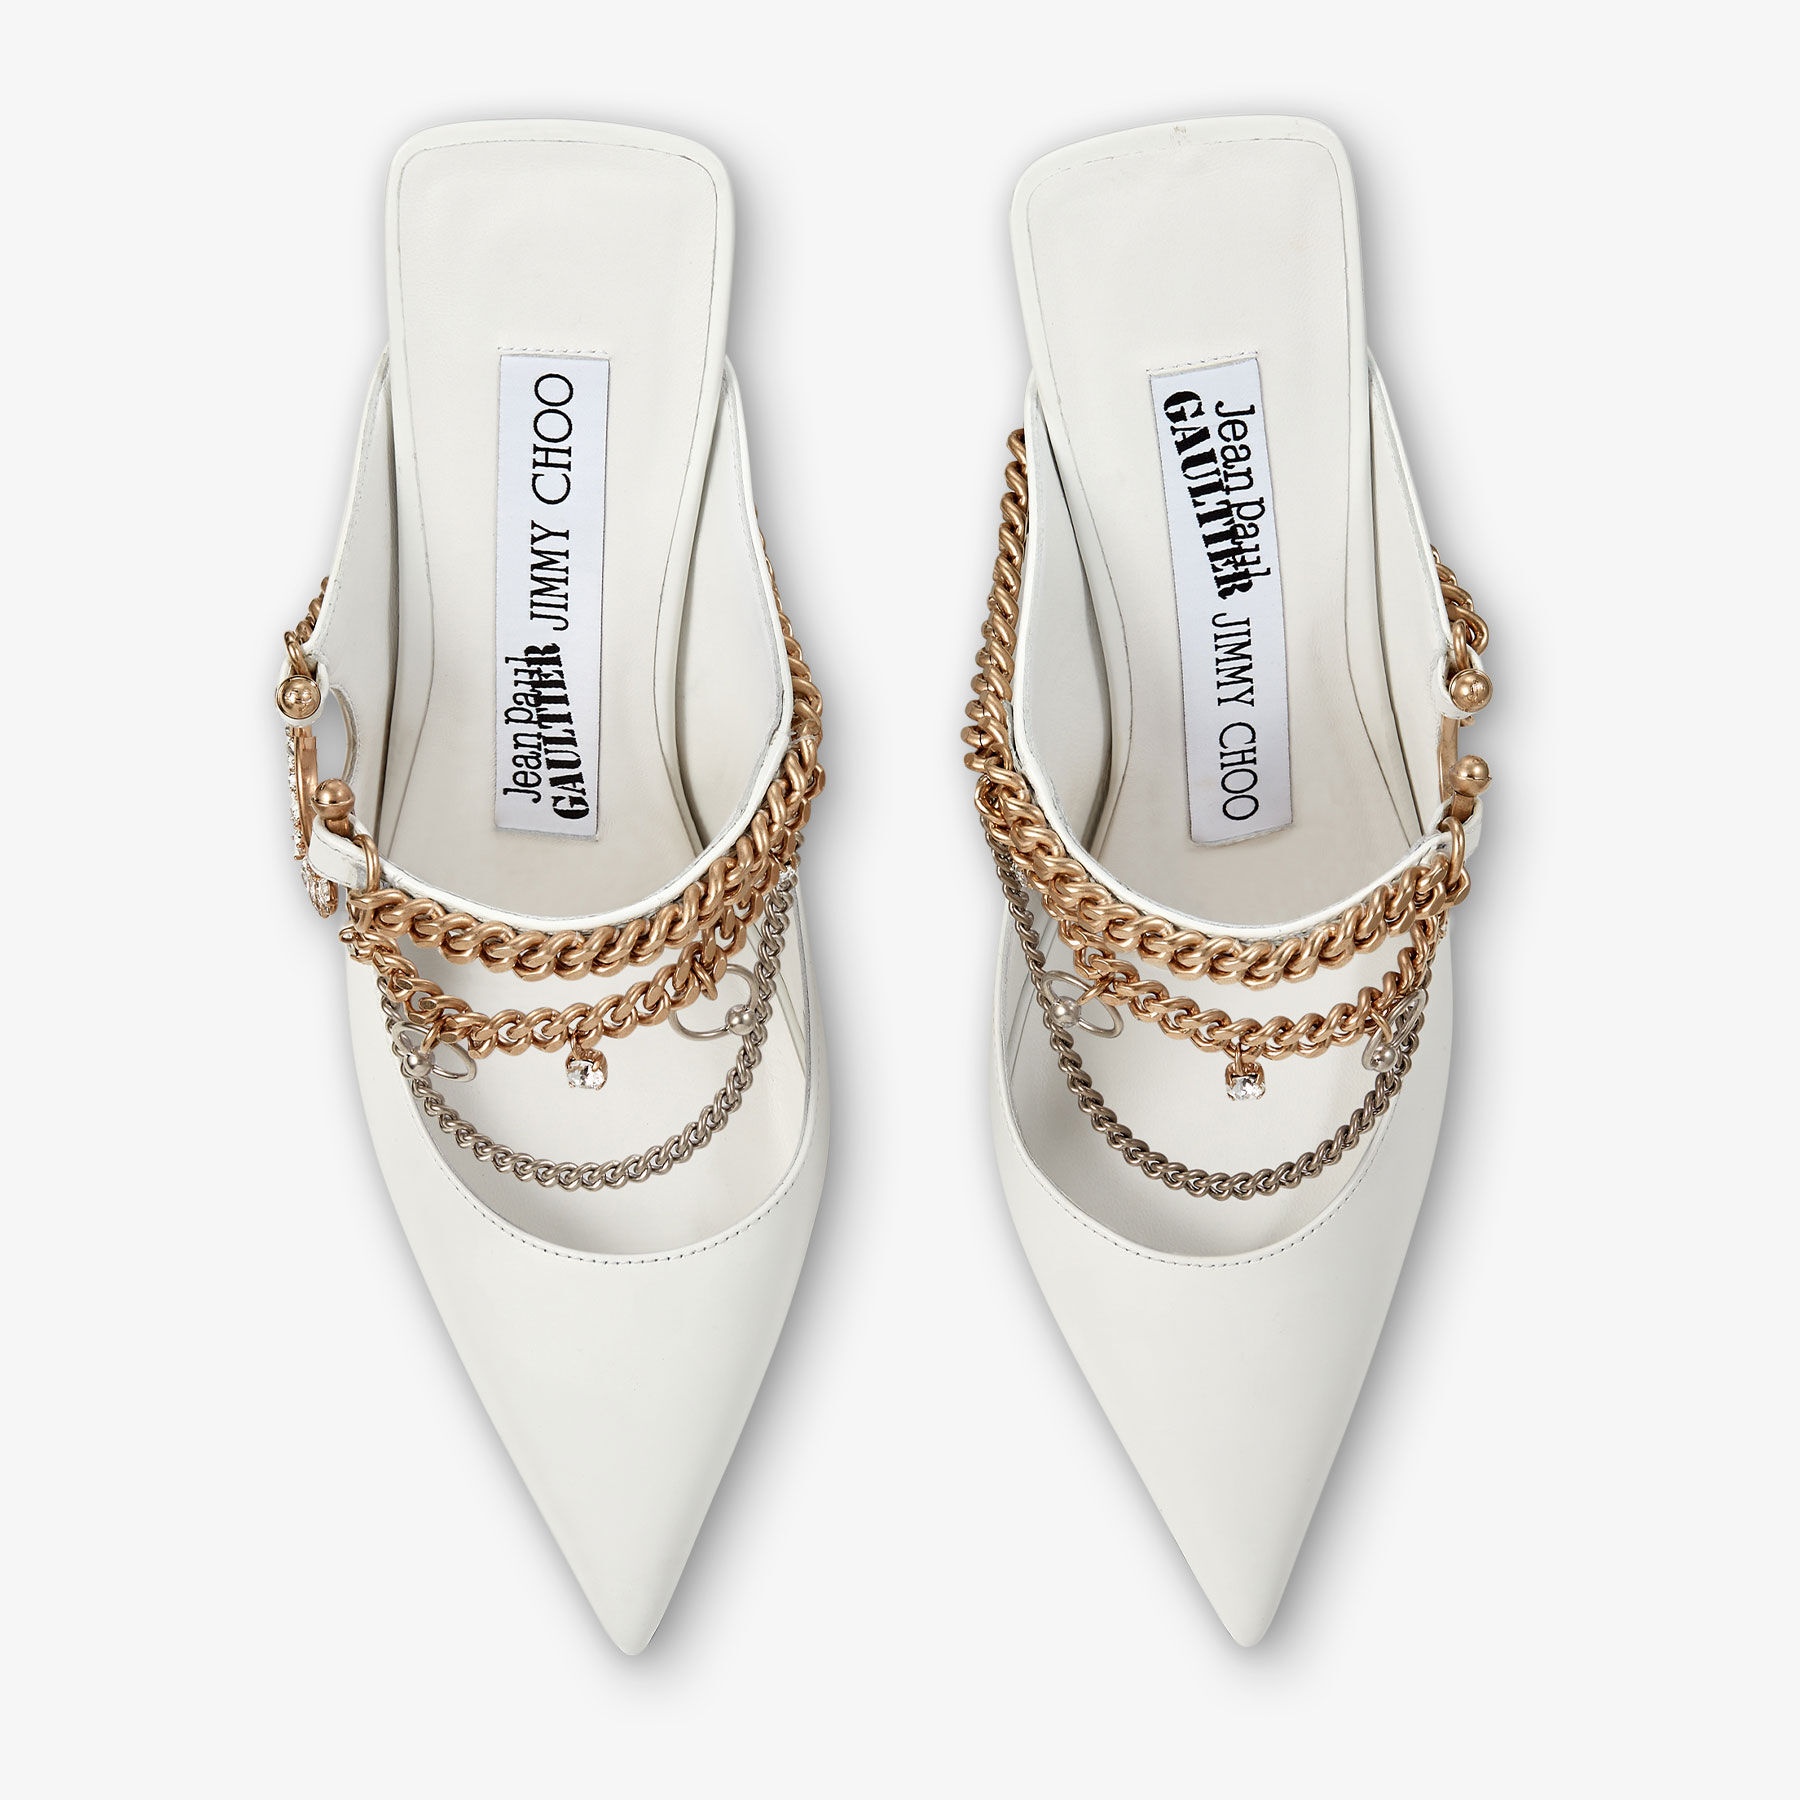 Jimmy Choo / Jean Paul Gaultier Bing 90
Optical White Calf Leather Mules with Jewellery - 5